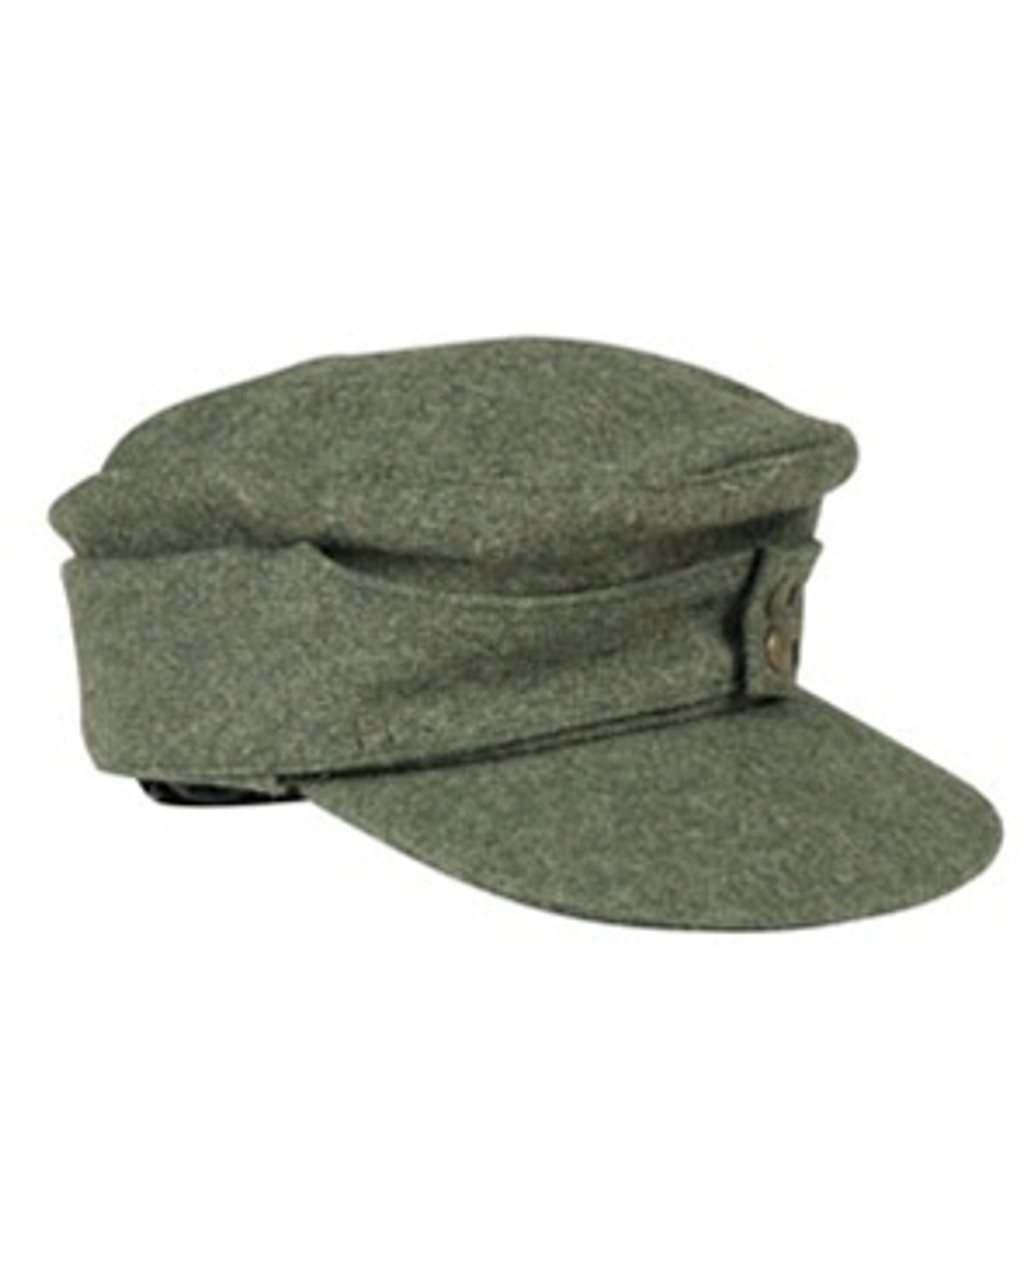 Sturm WH and SS Army Enlisted M43 Field cap from Hessen Antique